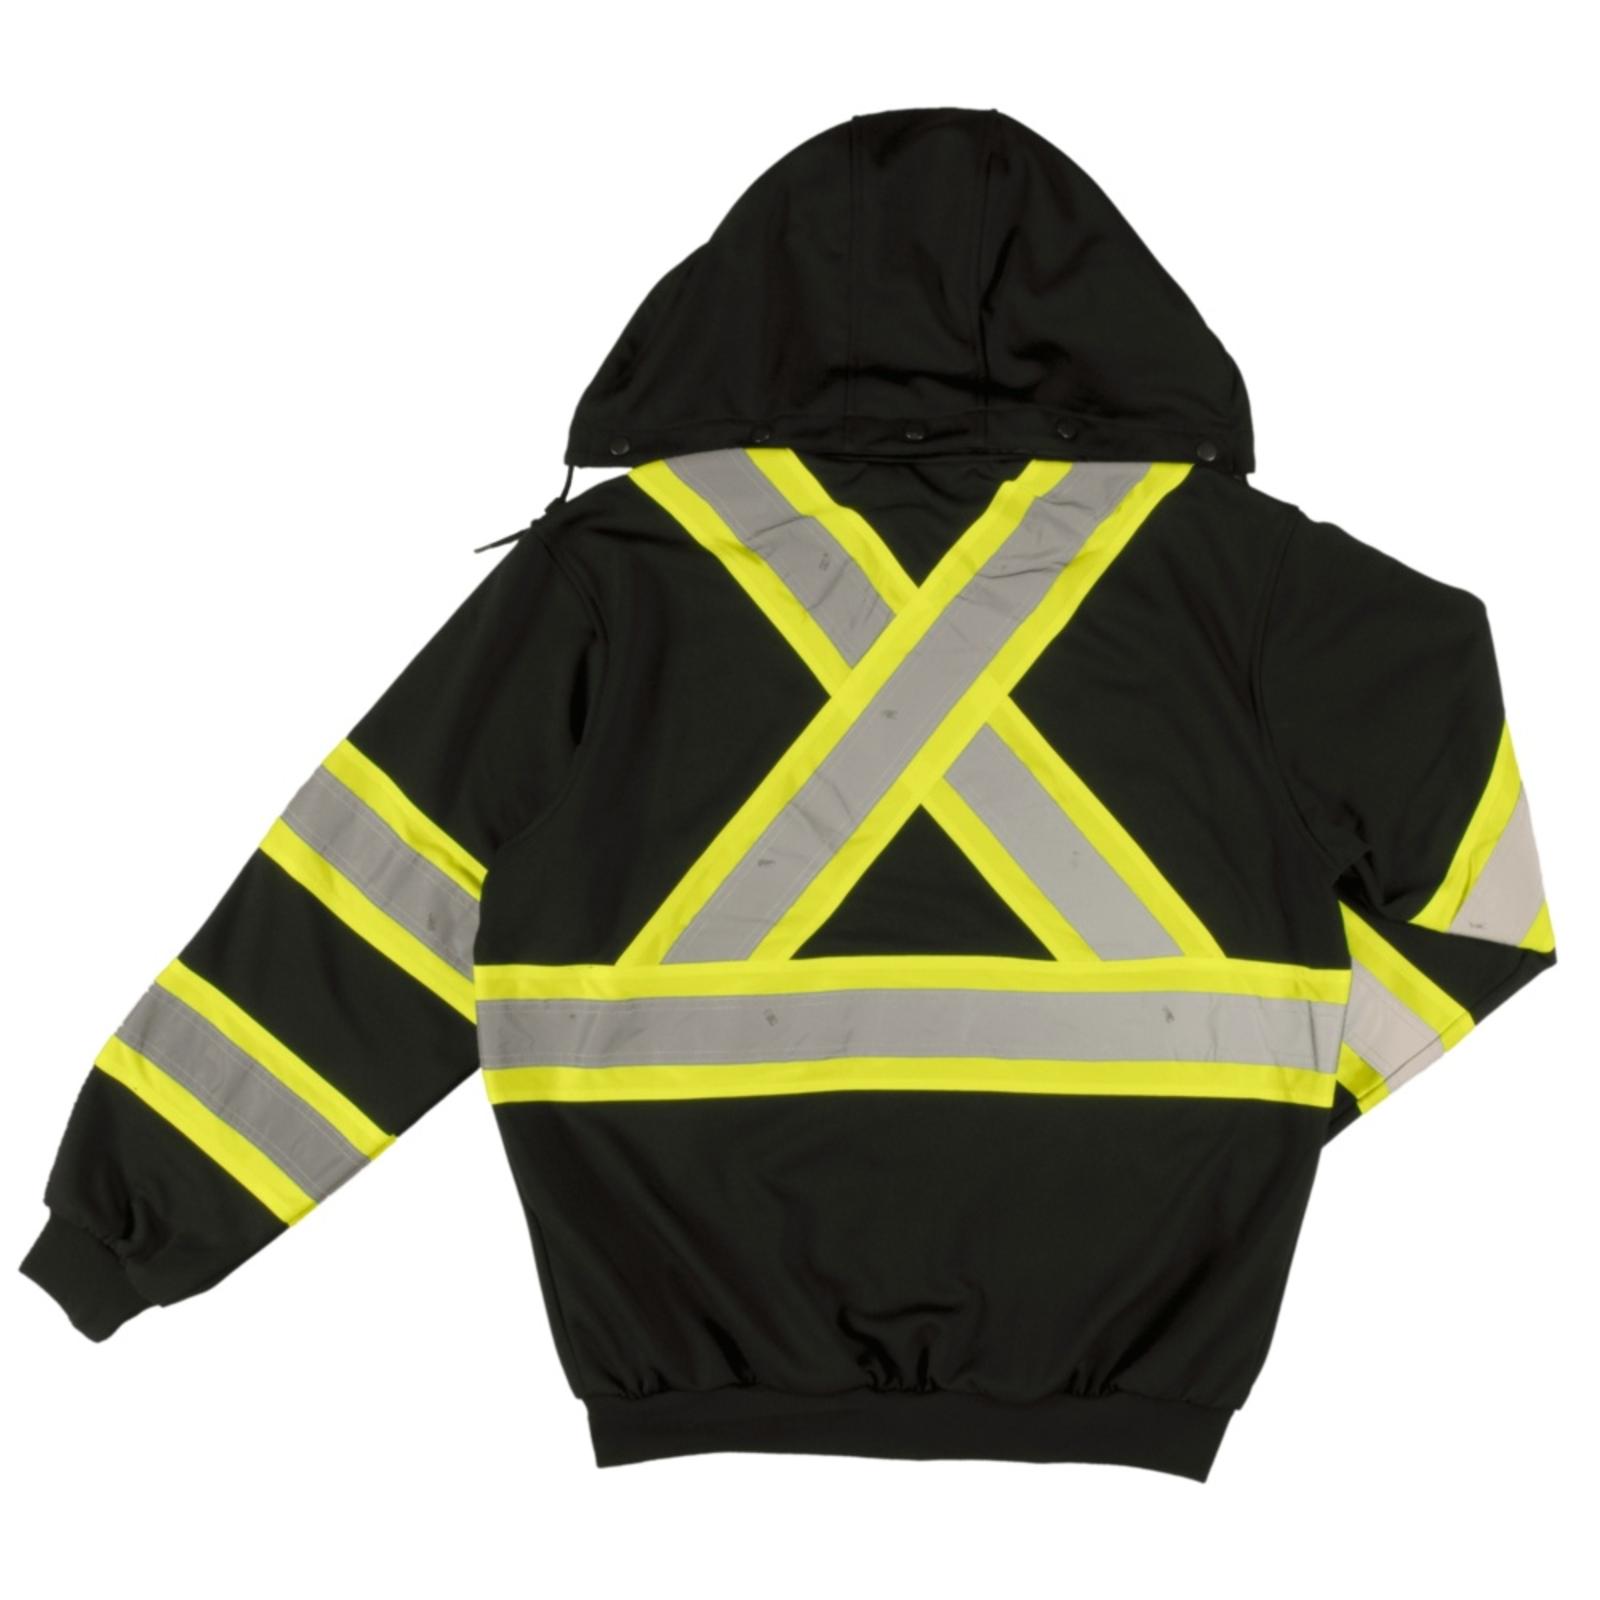 Tough Duck Unlined Safety Hoodie